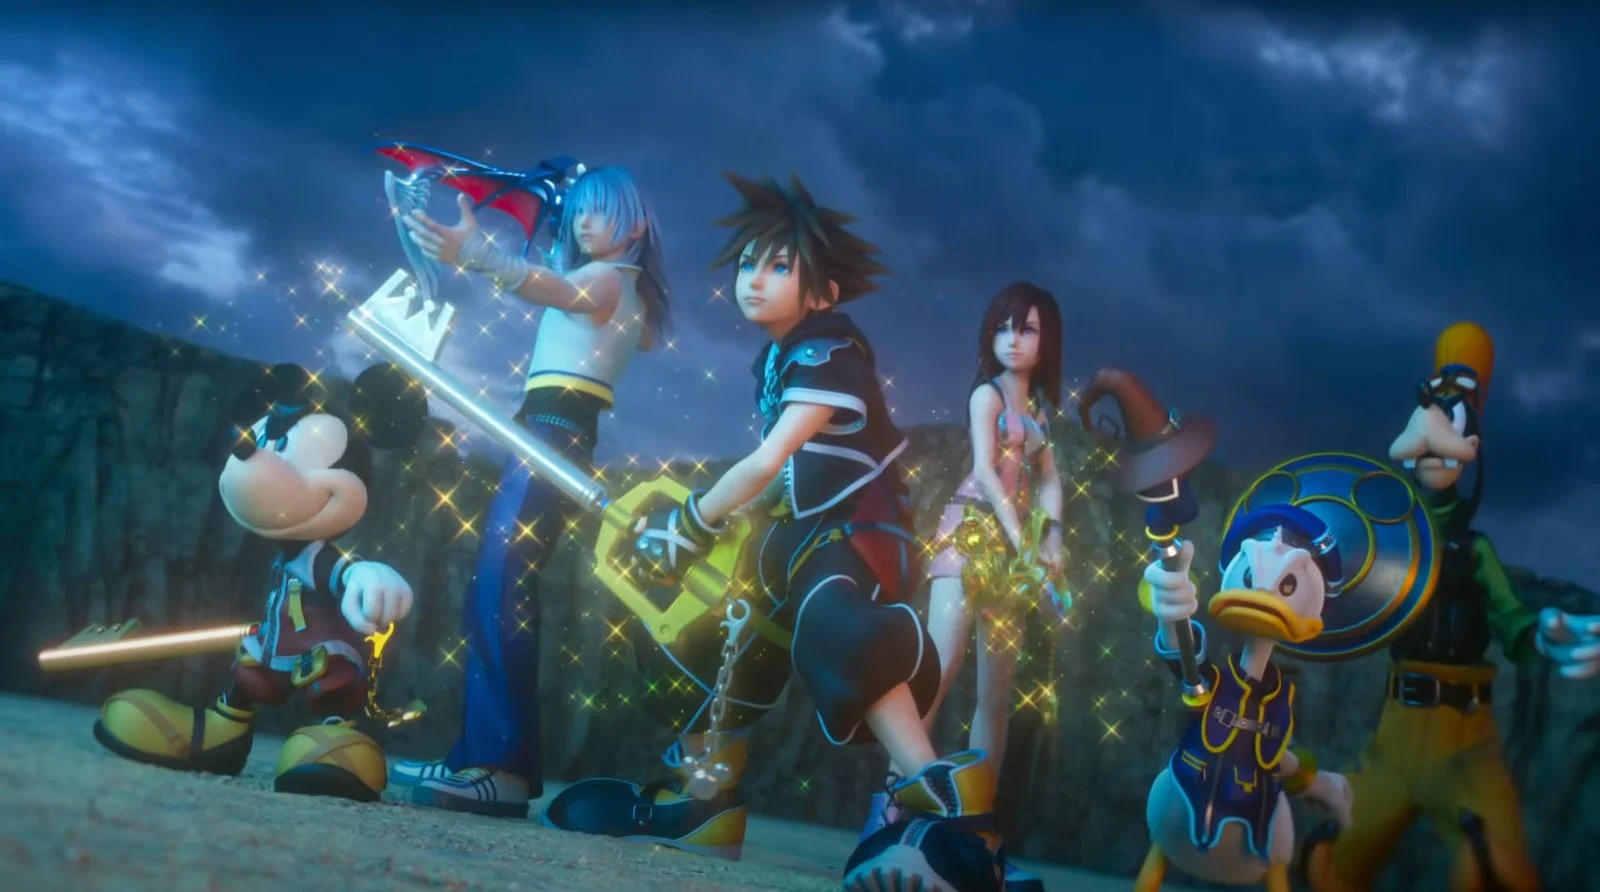 Why I chose to replay Kingdom Hearts 3 on the series' 20th